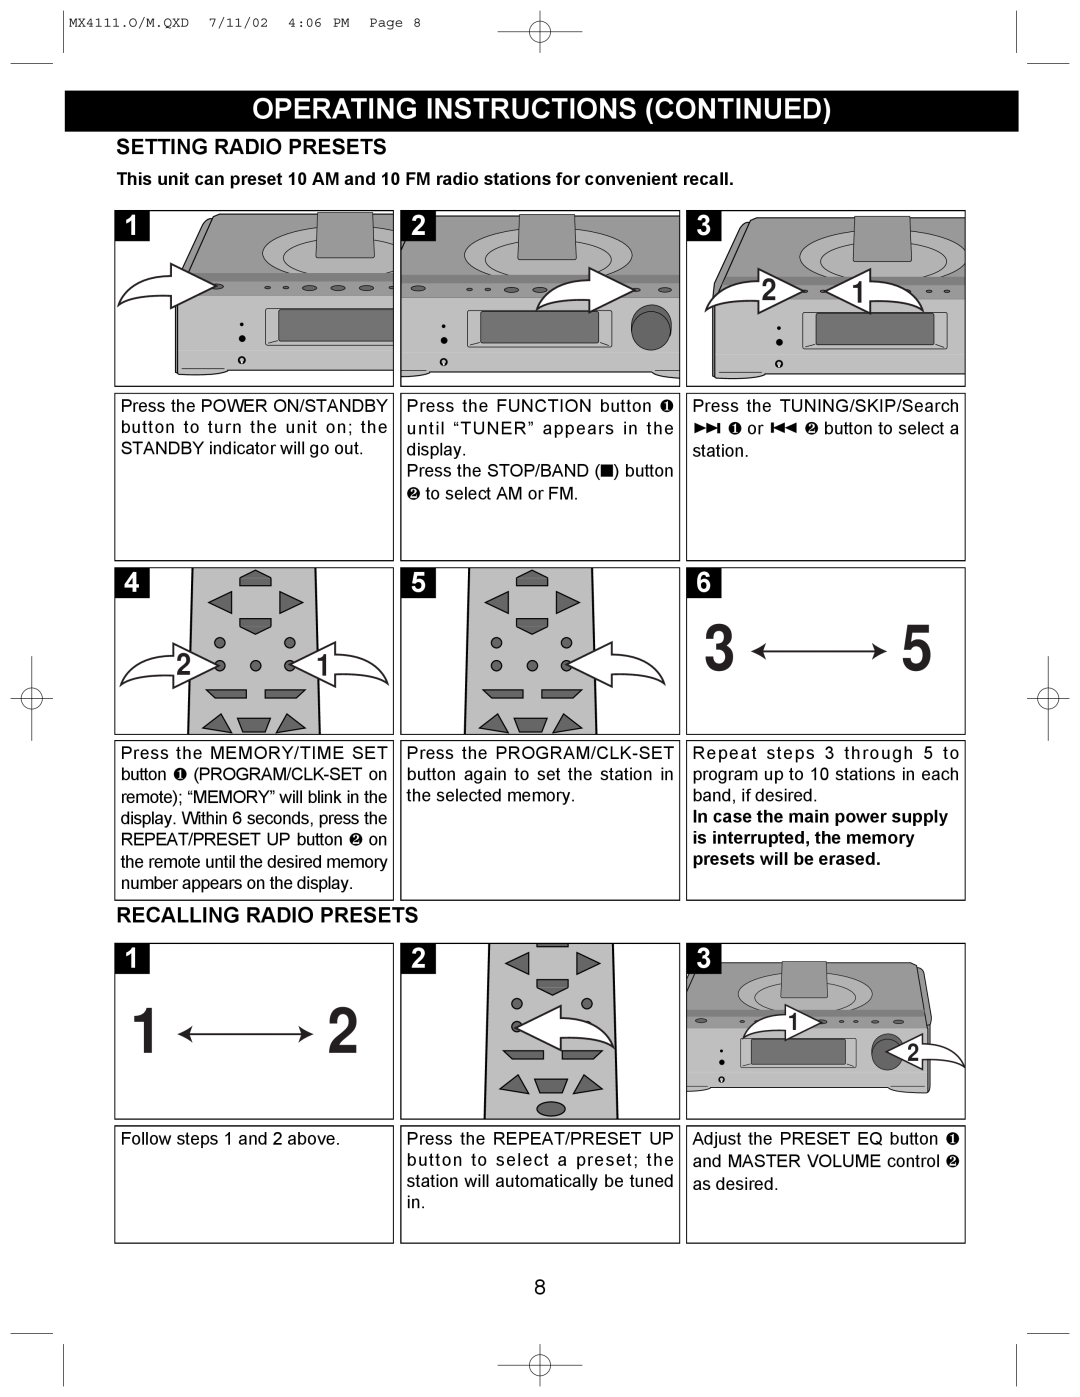 Memorex MX4111 operating instructions Setting Radio Presets, Recalling Radio Presets, Operating Instructions Continued 